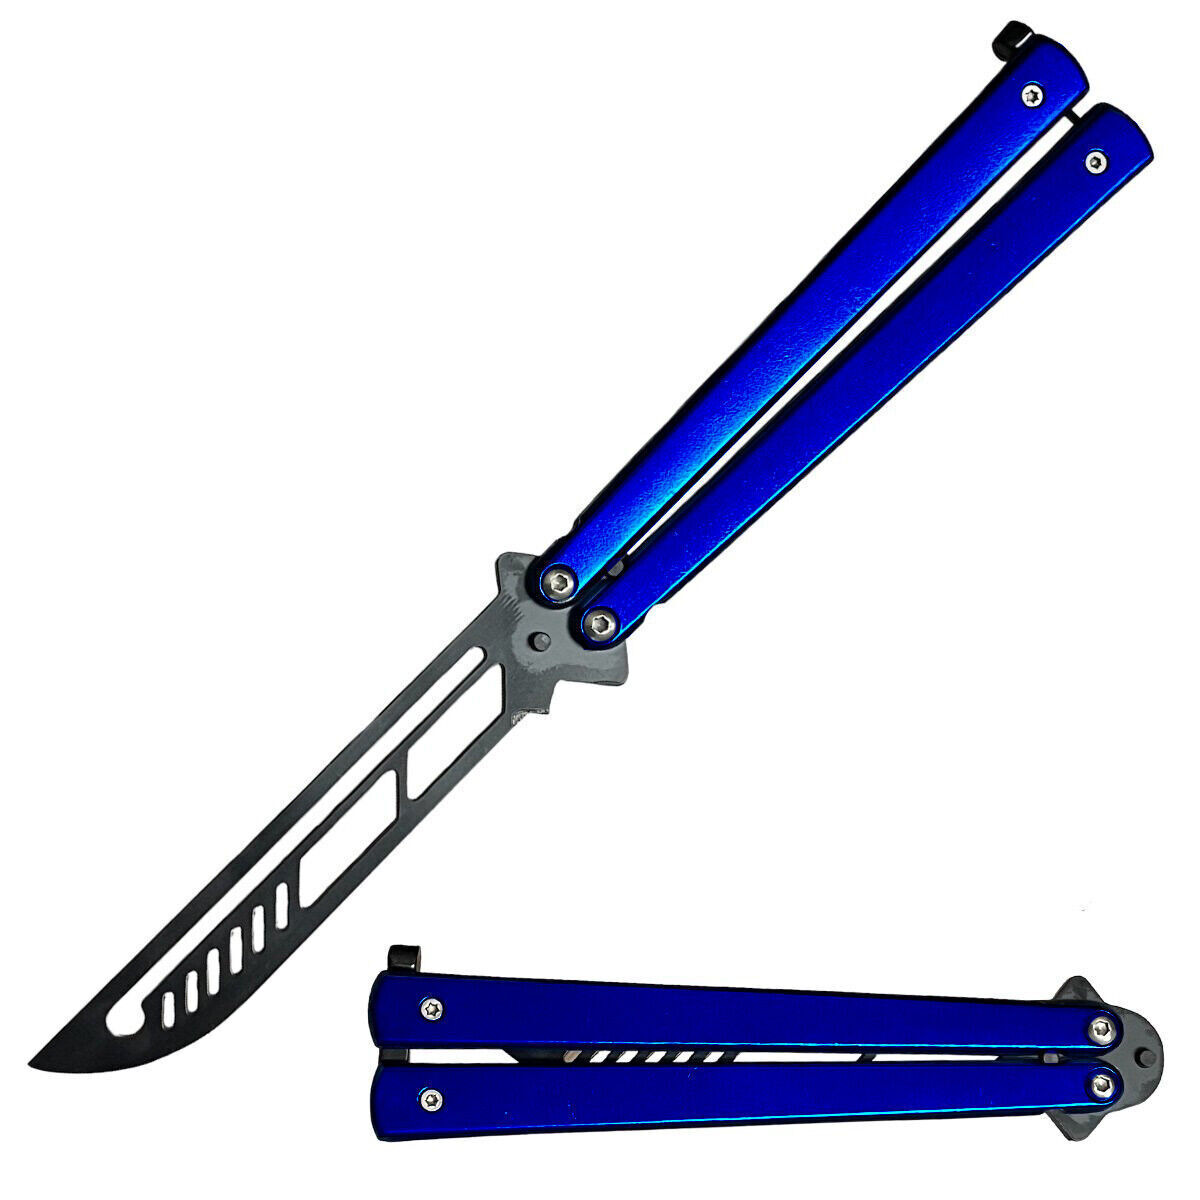 High Quality Practice BALISONG METAL BUTTERFLY Trainer Knife BLADE Tool Dull